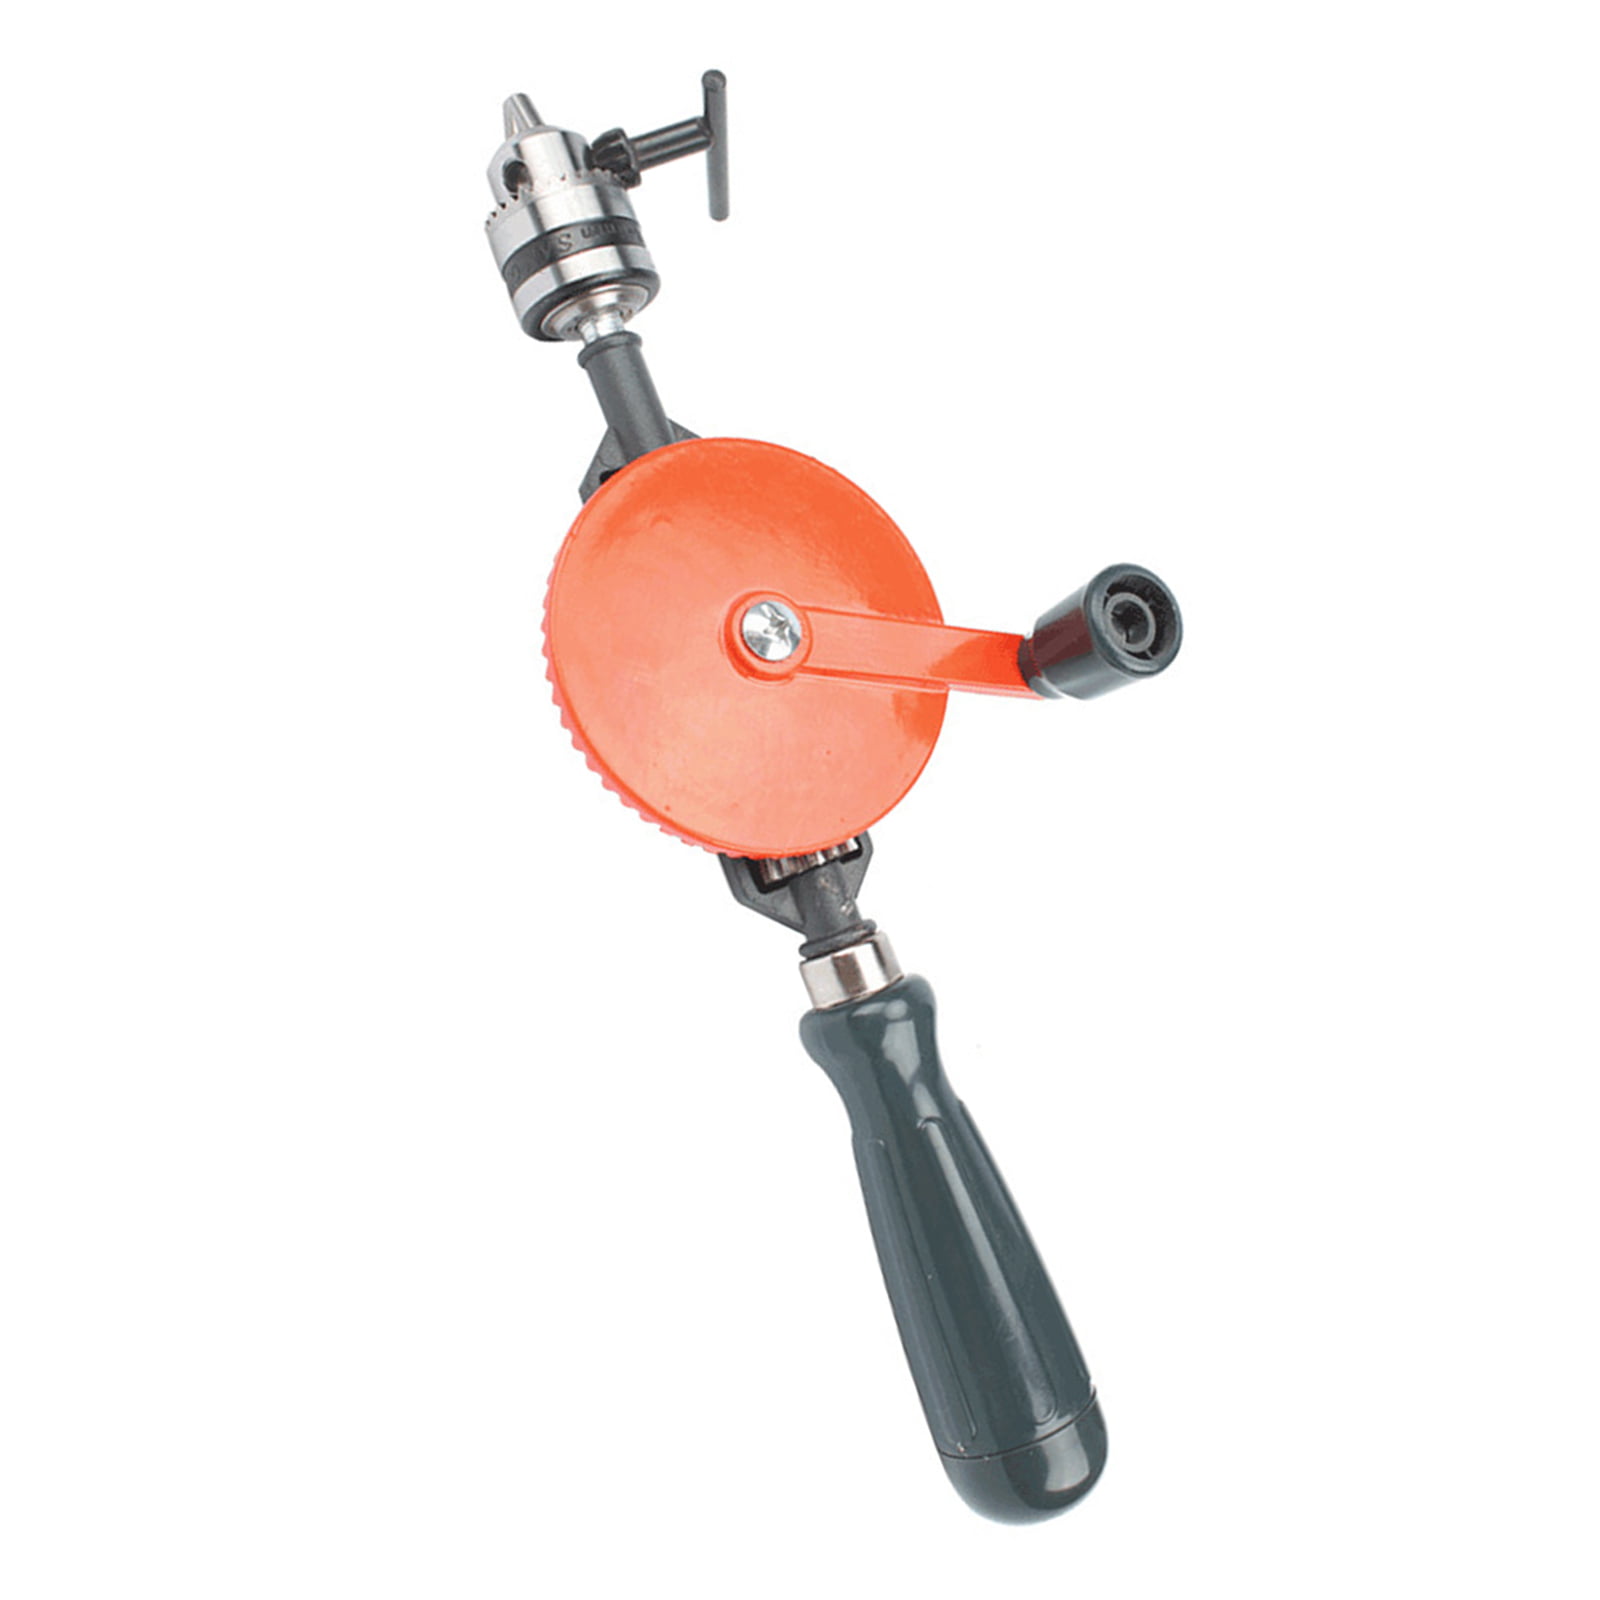 AMTECH HAND DRILL with DOUBLE PINION MECHANISM & WOODEN HANDLE 3 YEARS WARRANTY 